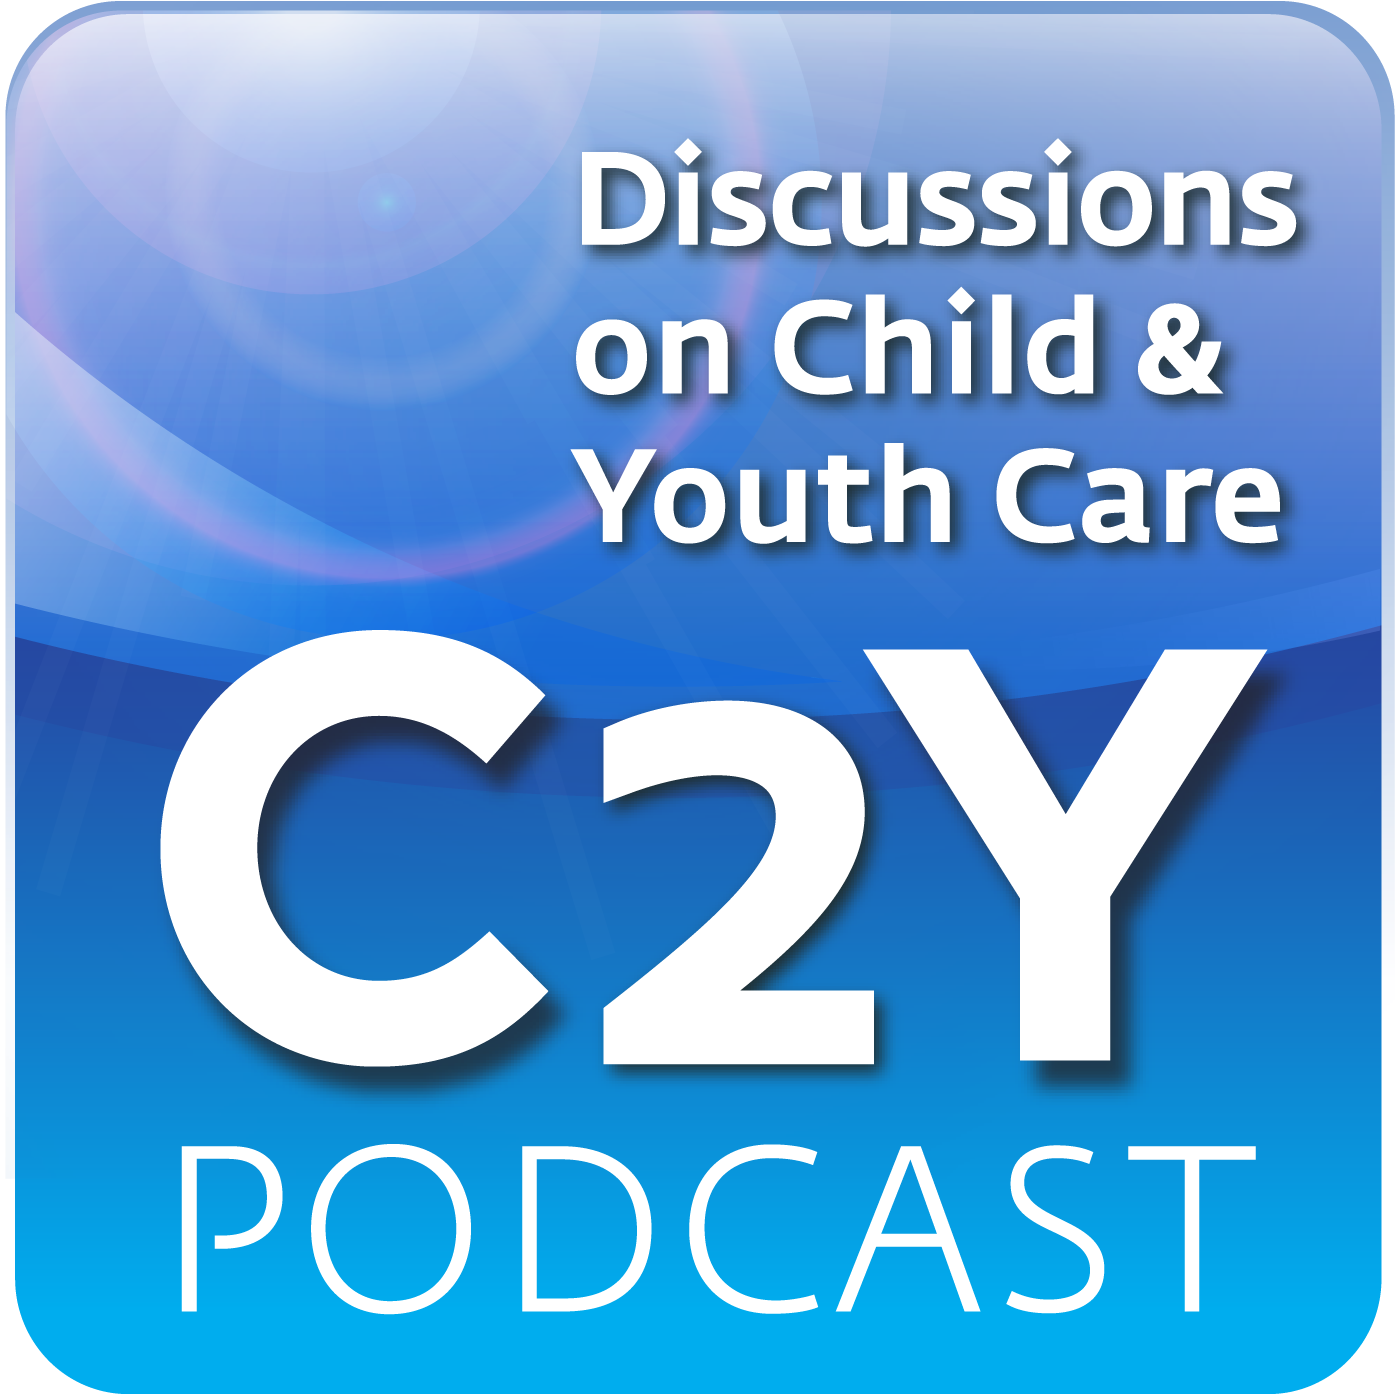 Videos on Working With Children and Youth: Children & Youth in Care